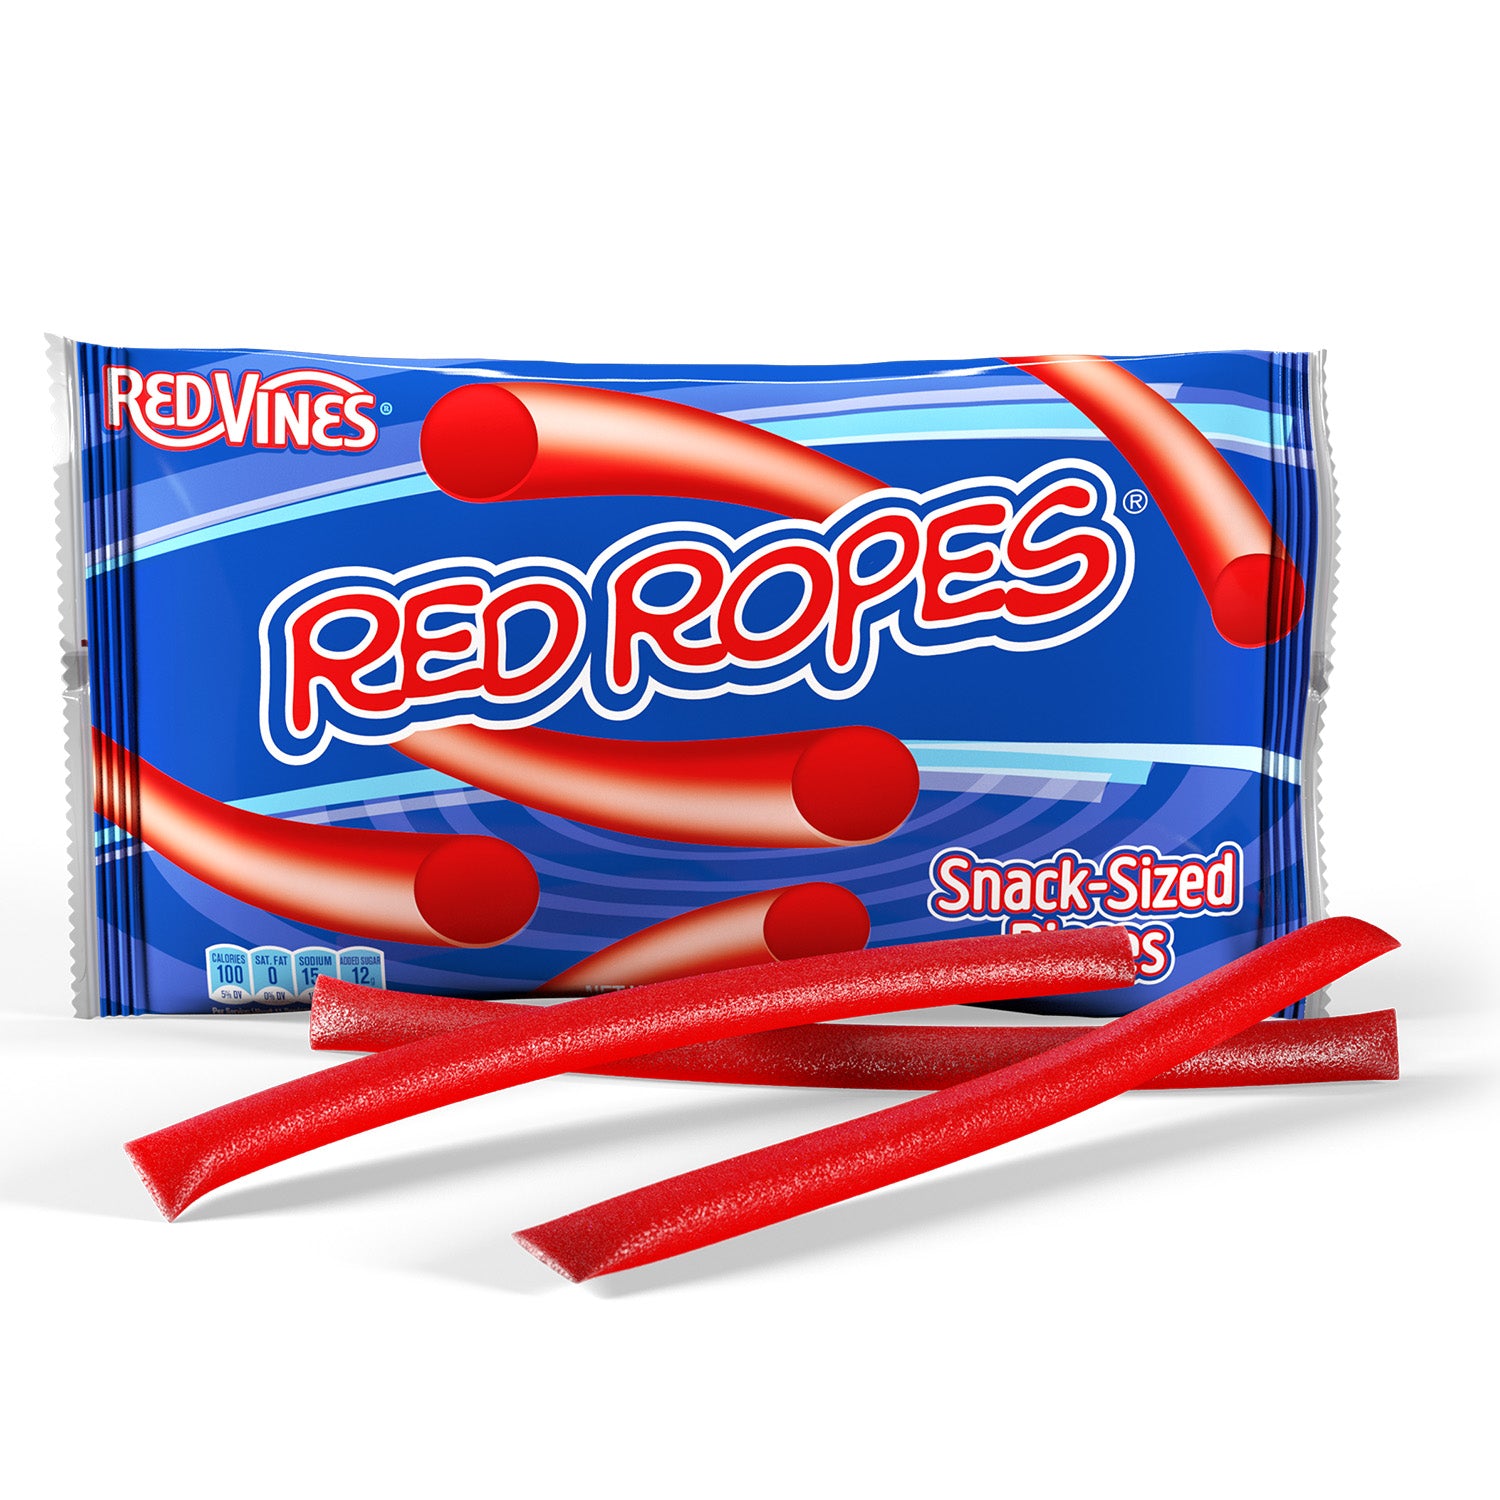 Red Ropes® Licorice Ropes, 12/12 oz